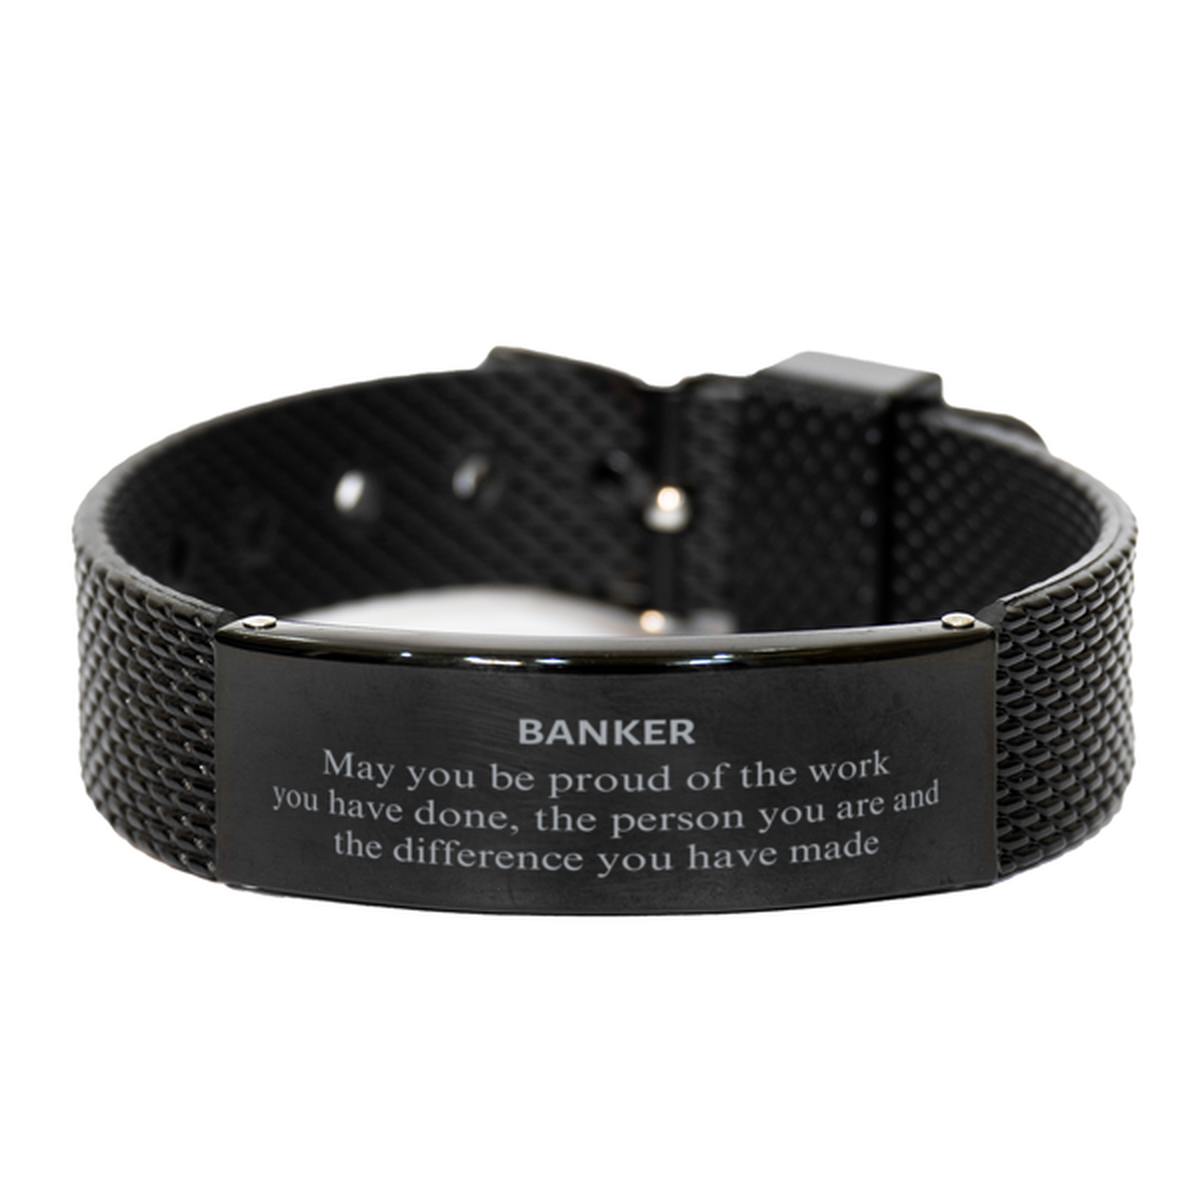 Banker May you be proud of the work you have done, Retirement Banker Black Shark Mesh Bracelet for Colleague Appreciation Gifts Amazing for Banker